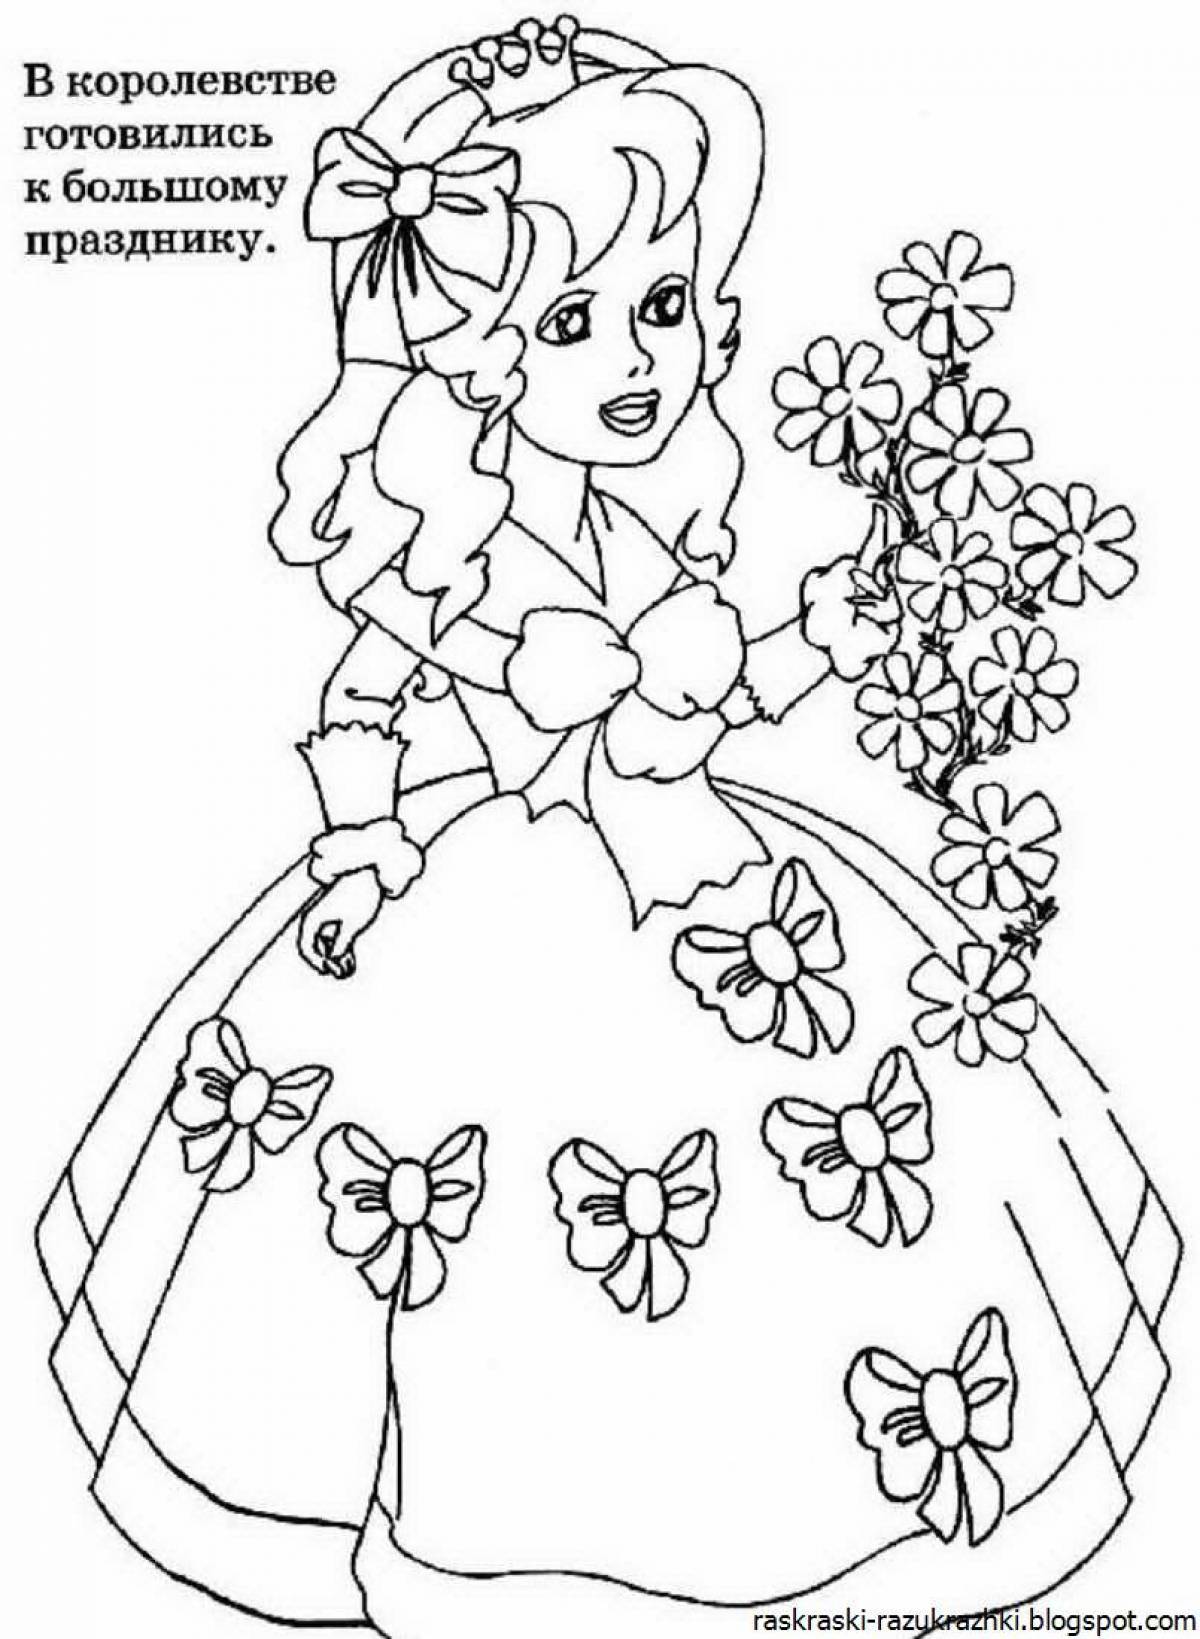 Delightful coloring book for girls 5-6 years old